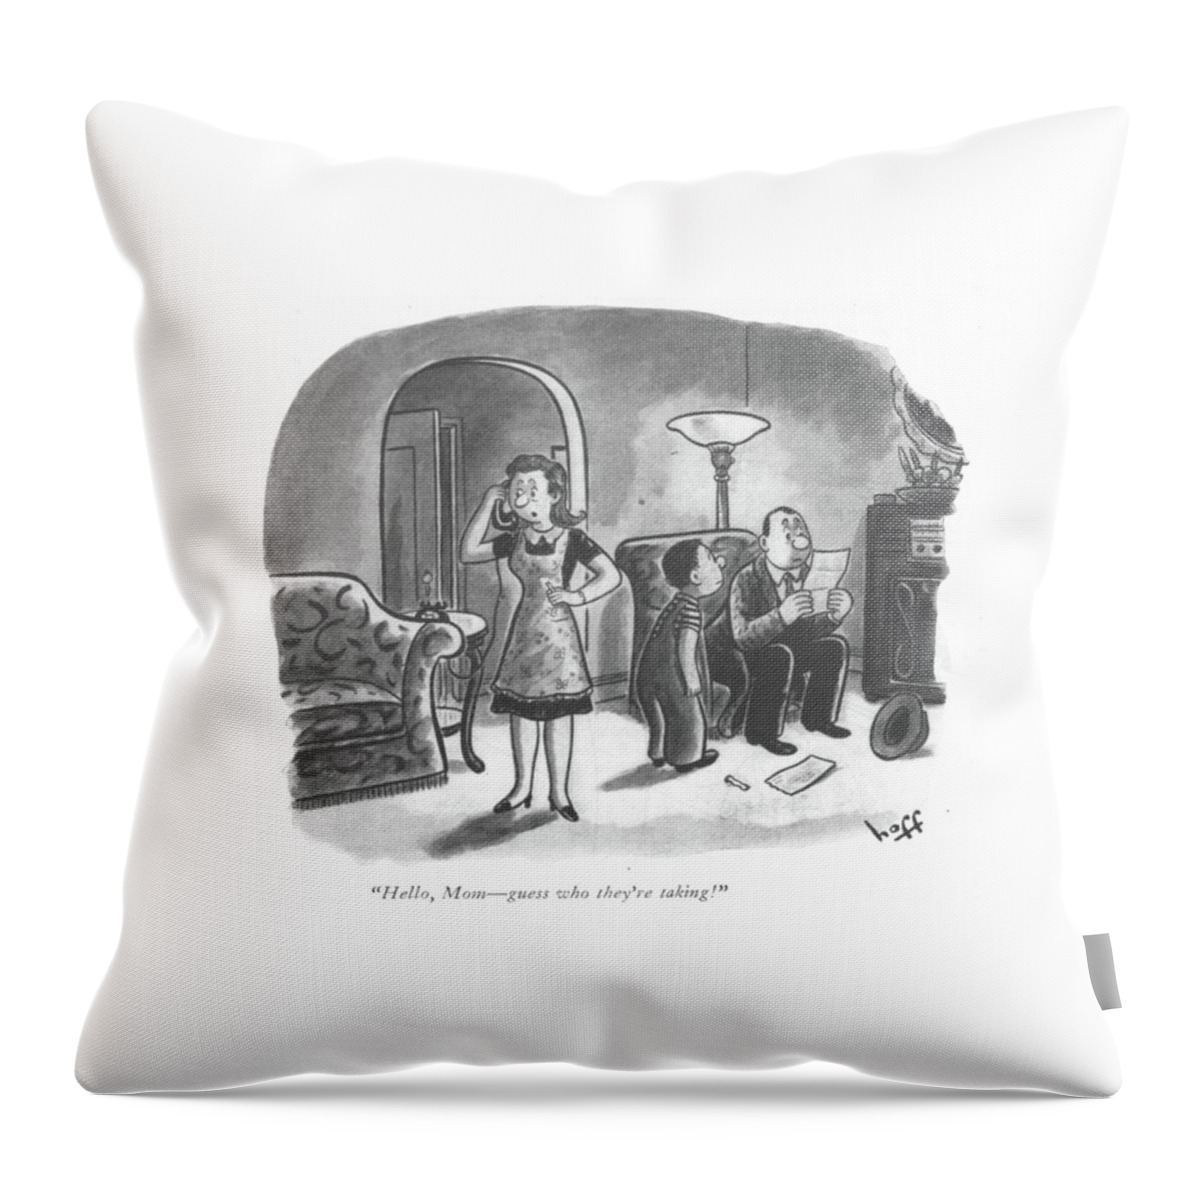 Hello, Mom - Guess Who They're Taking! Throw Pillow